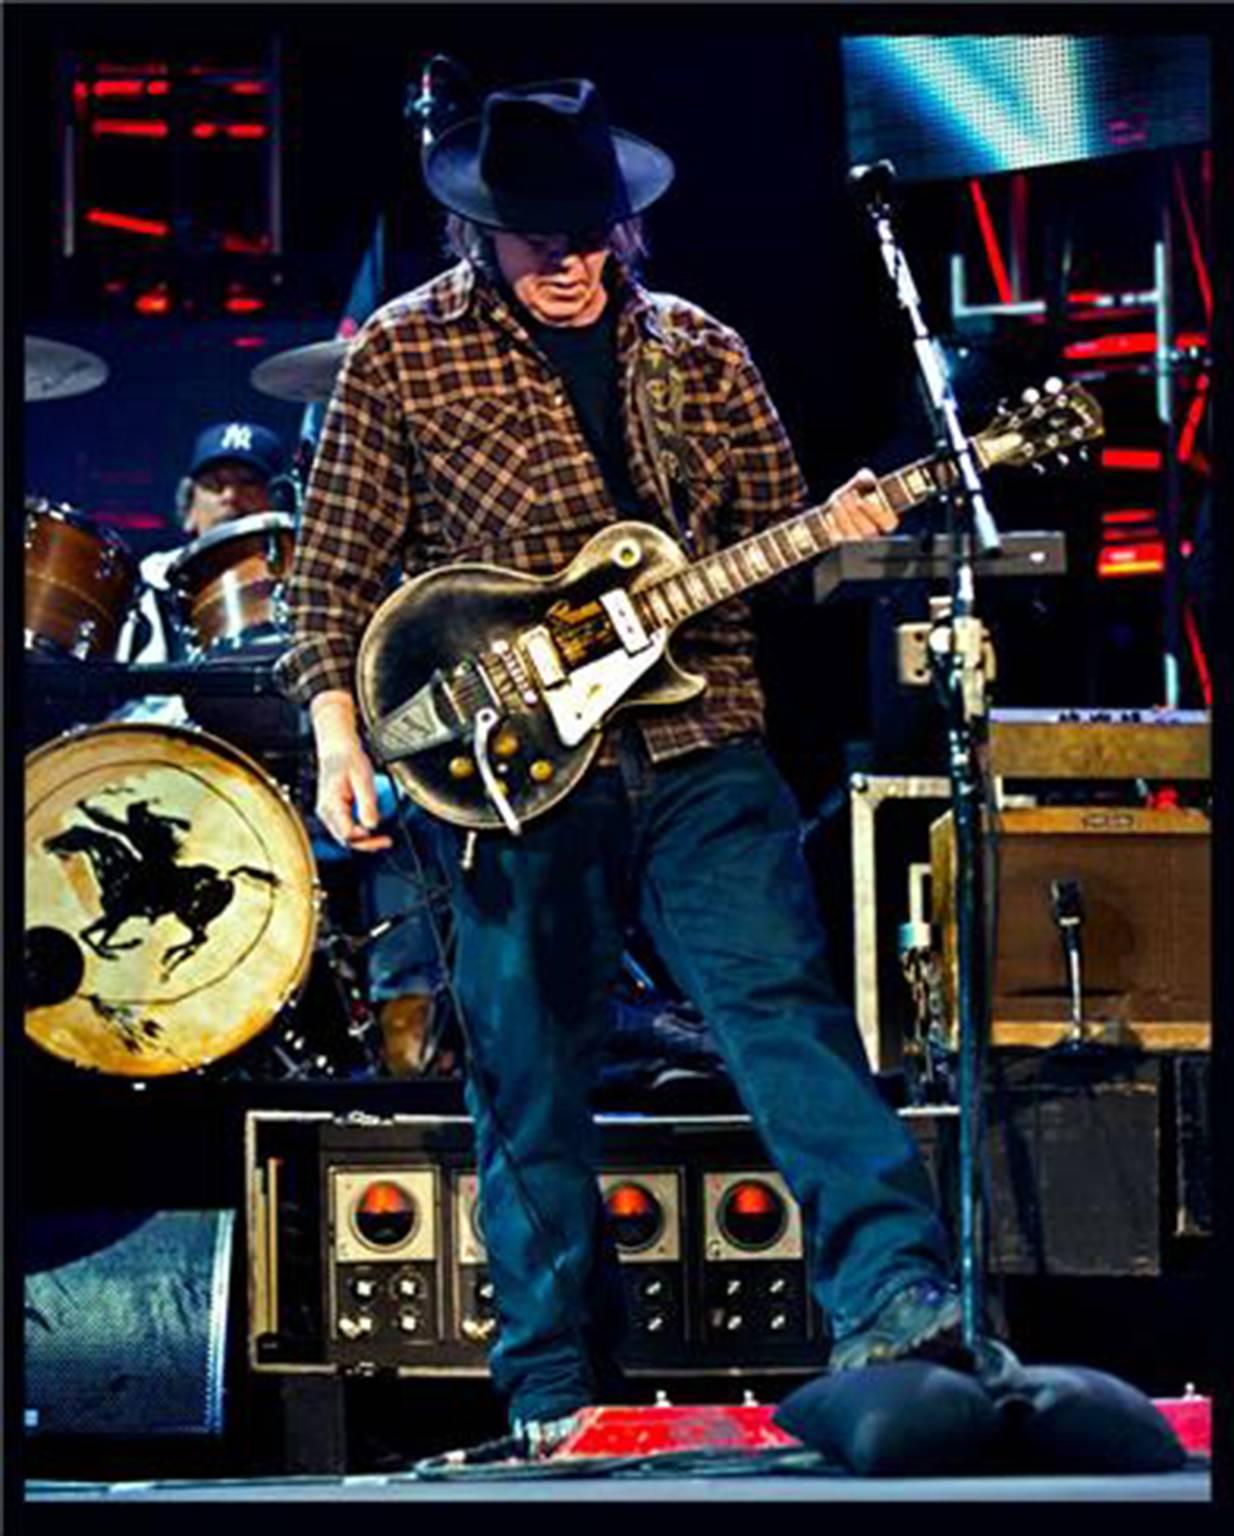 Julie Gardner Color Photograph - Neil Young at MusiCares, 2013